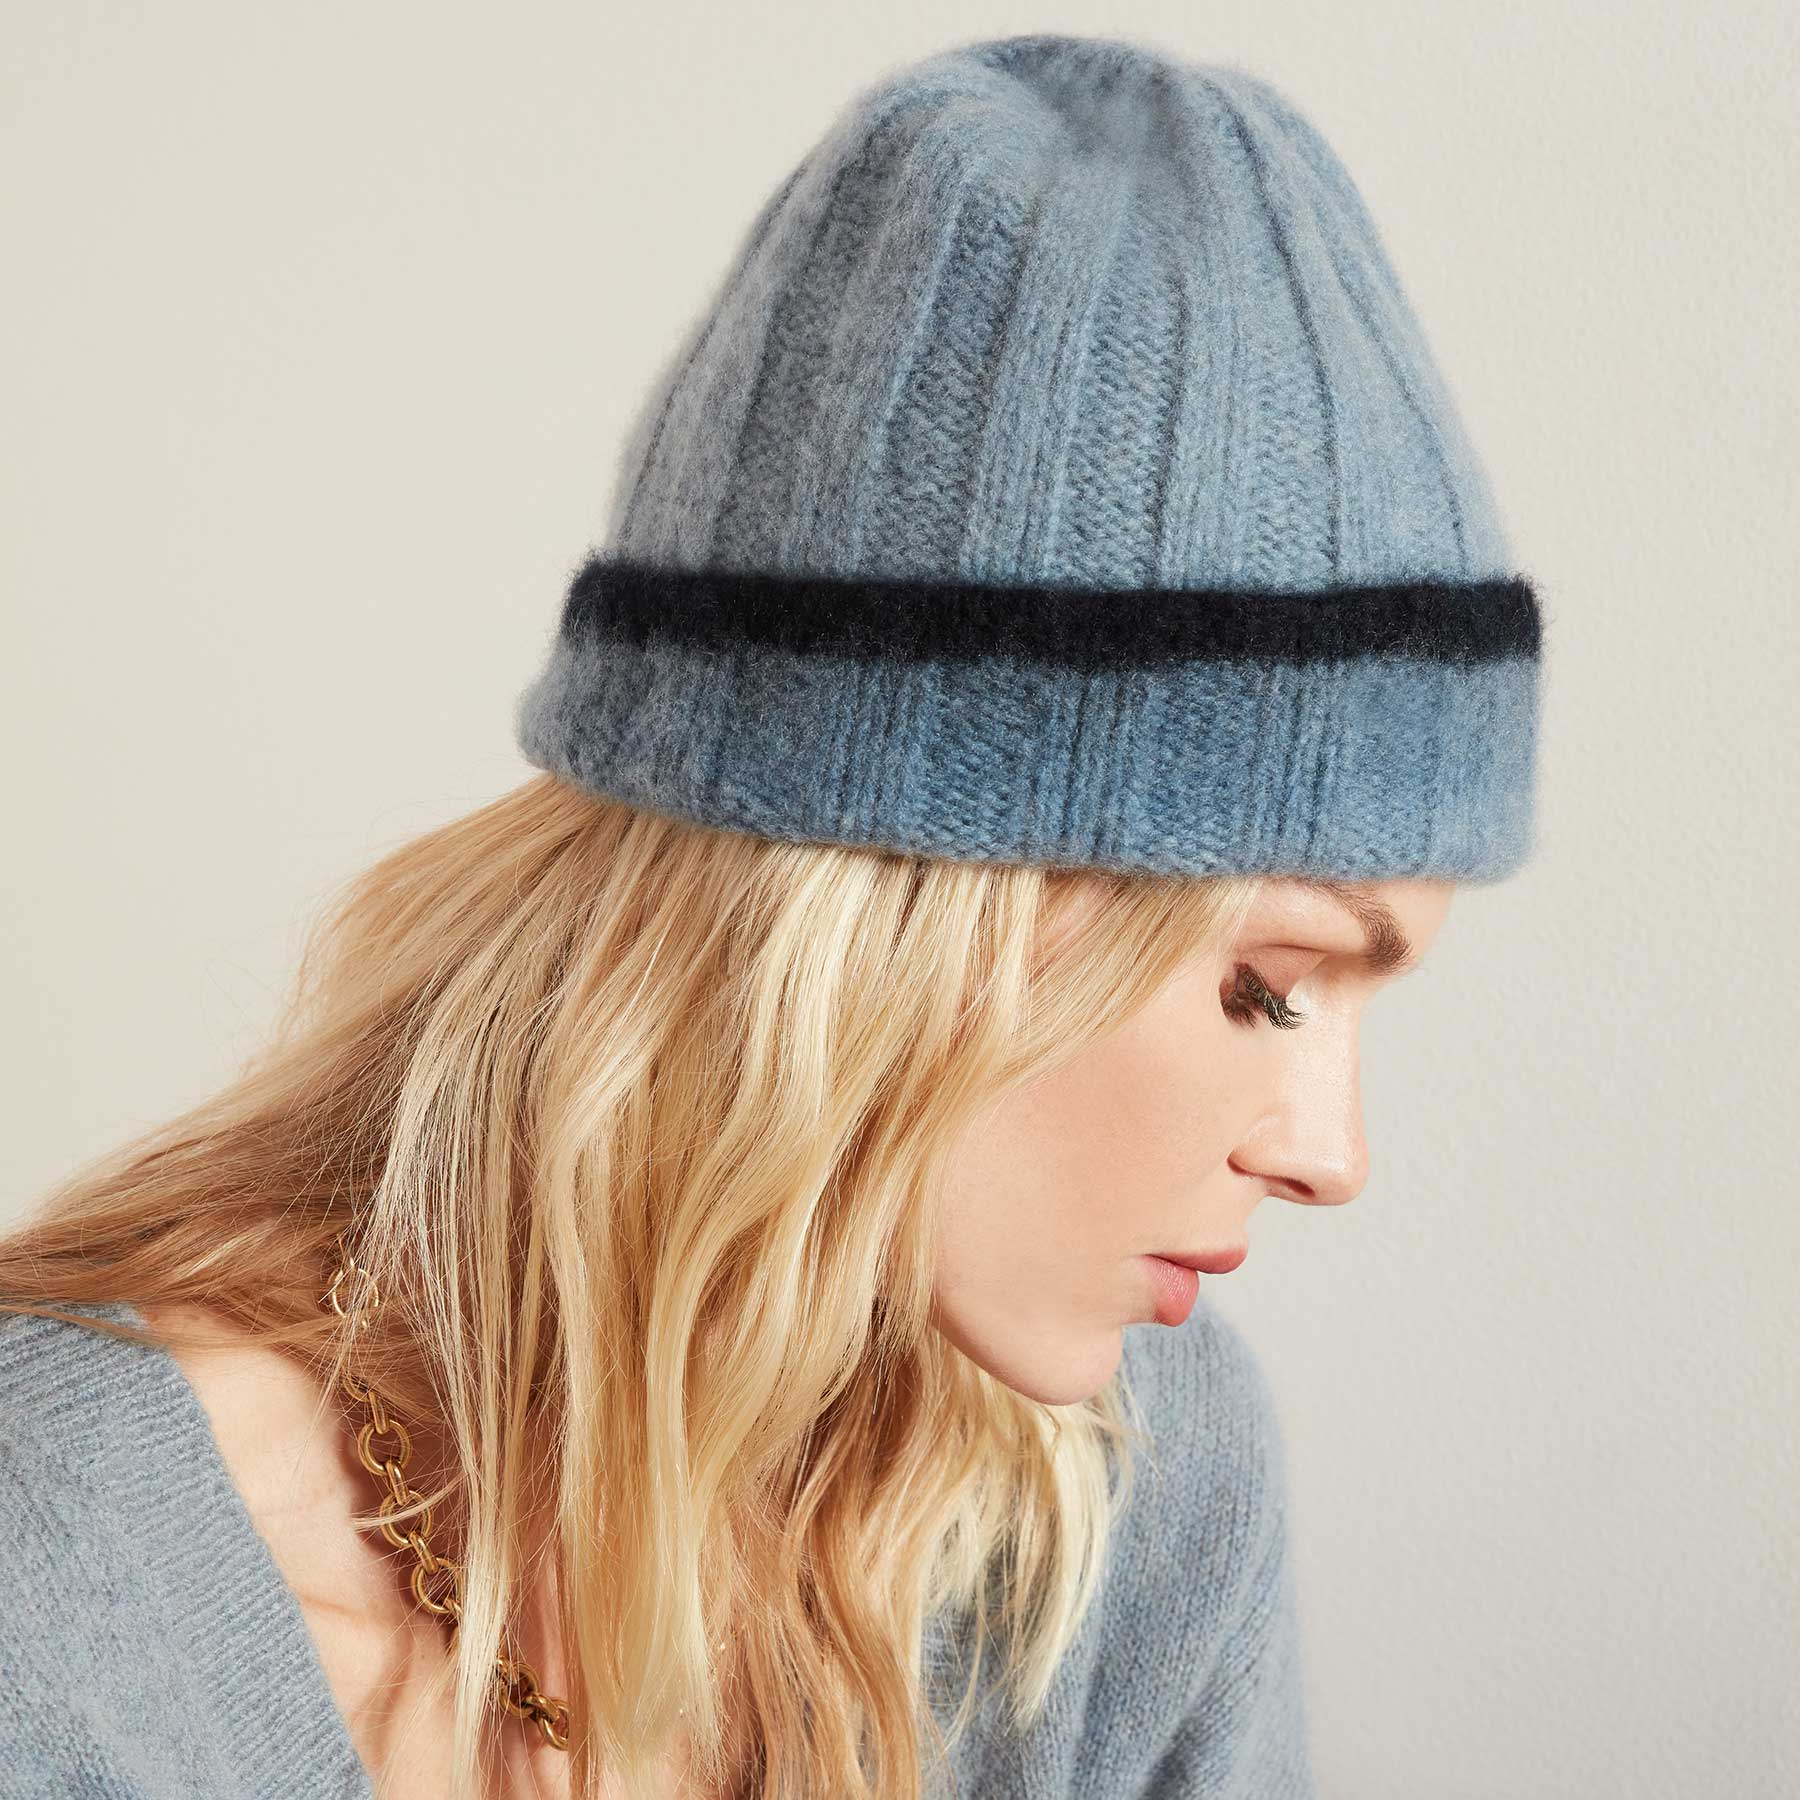 Dip Cashmere Beanie Dusty Sky/Navy | James Perse Los